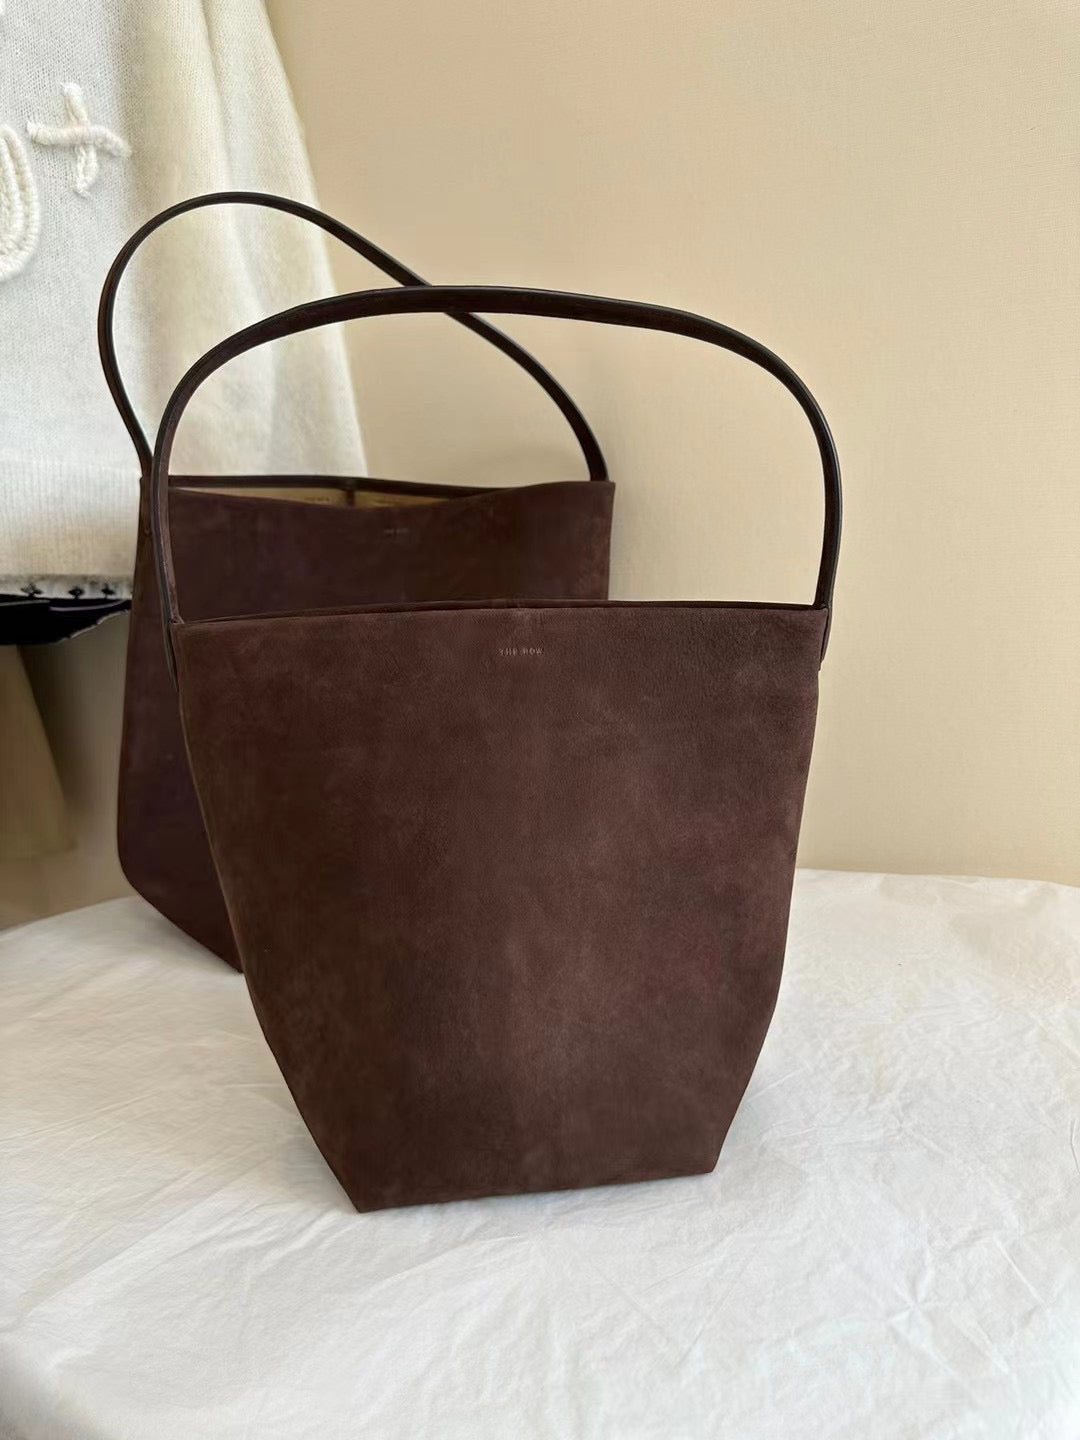 TR N/S Tote Bag Suede - Tundra, Wood